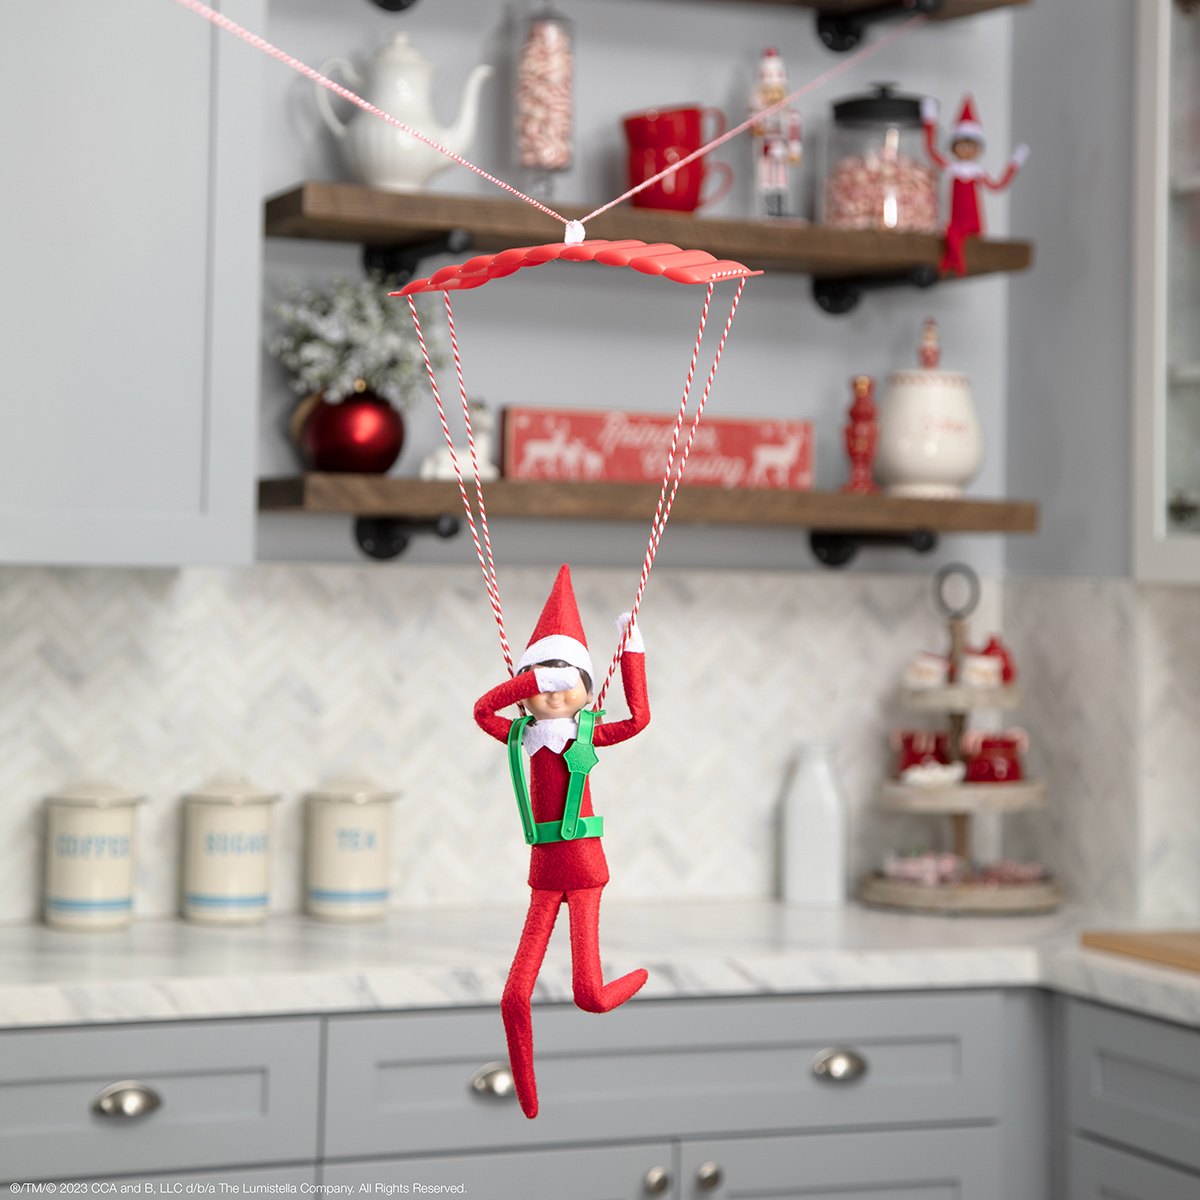 The Elf on the Shelf ziplining through the kitchen while covering their eyes